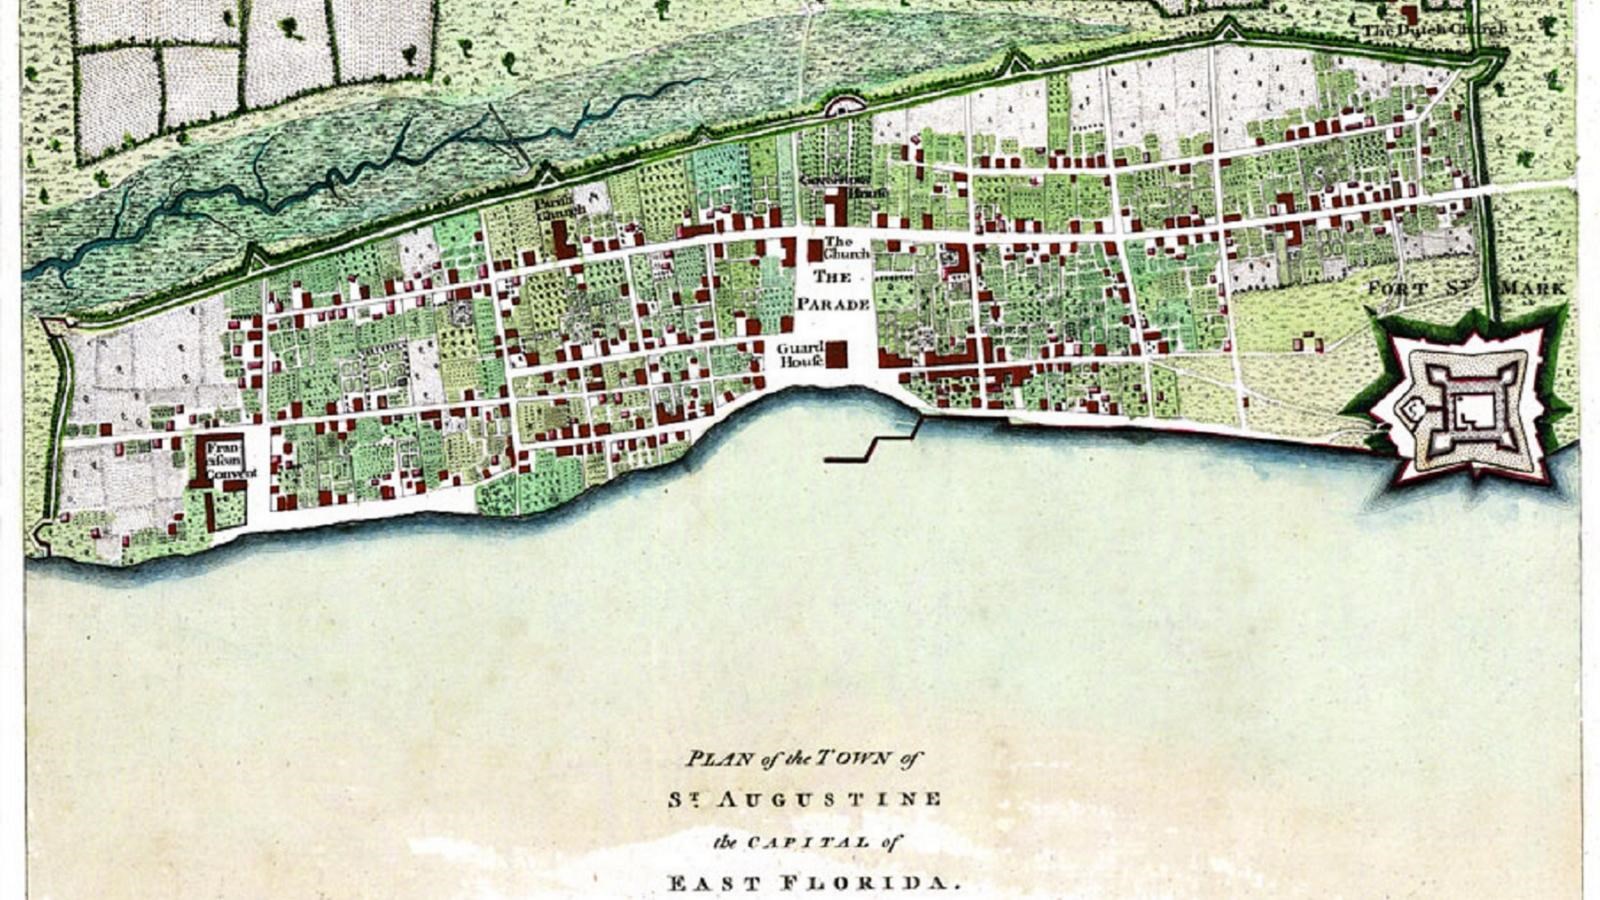 Illustrated overhead view of the Town of St Augustine as it looked in 1777